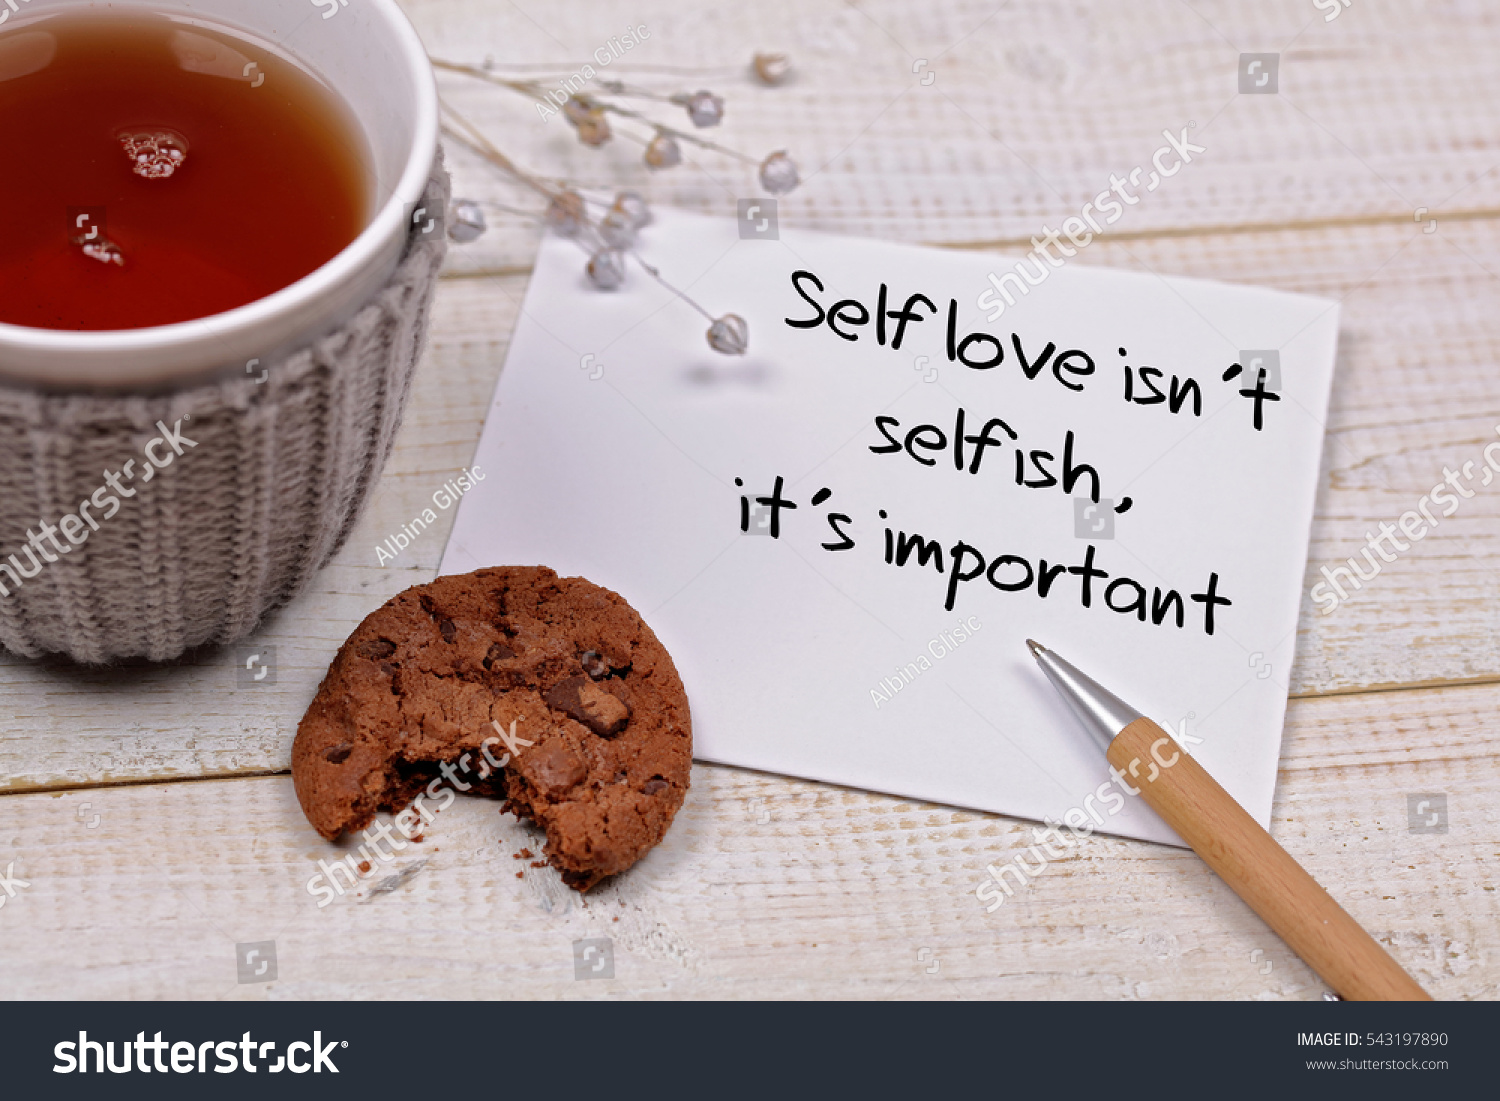 Inspiration motivation quote Self love is not selfish it is very important Happiness Life